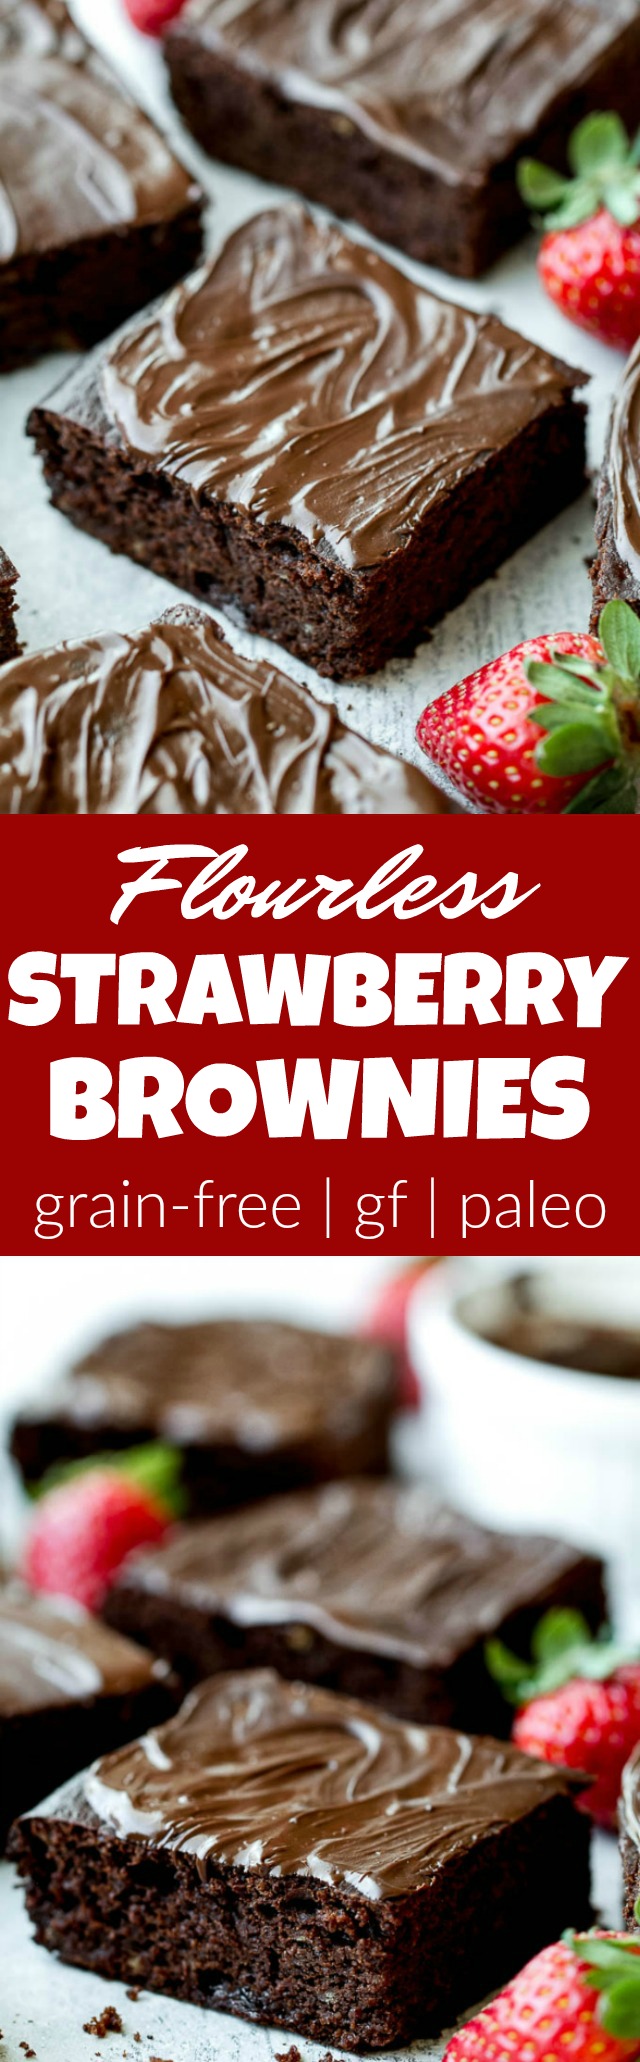 Flourless Strawberry Brownies made in one bowl with super simple ingredients! They’re grain-free, oil-free, and refined-sugar-free, so they make a deliciously healthy gluten-free and paleo treat for when those chocolate cravings hit | runningwithspoons.com